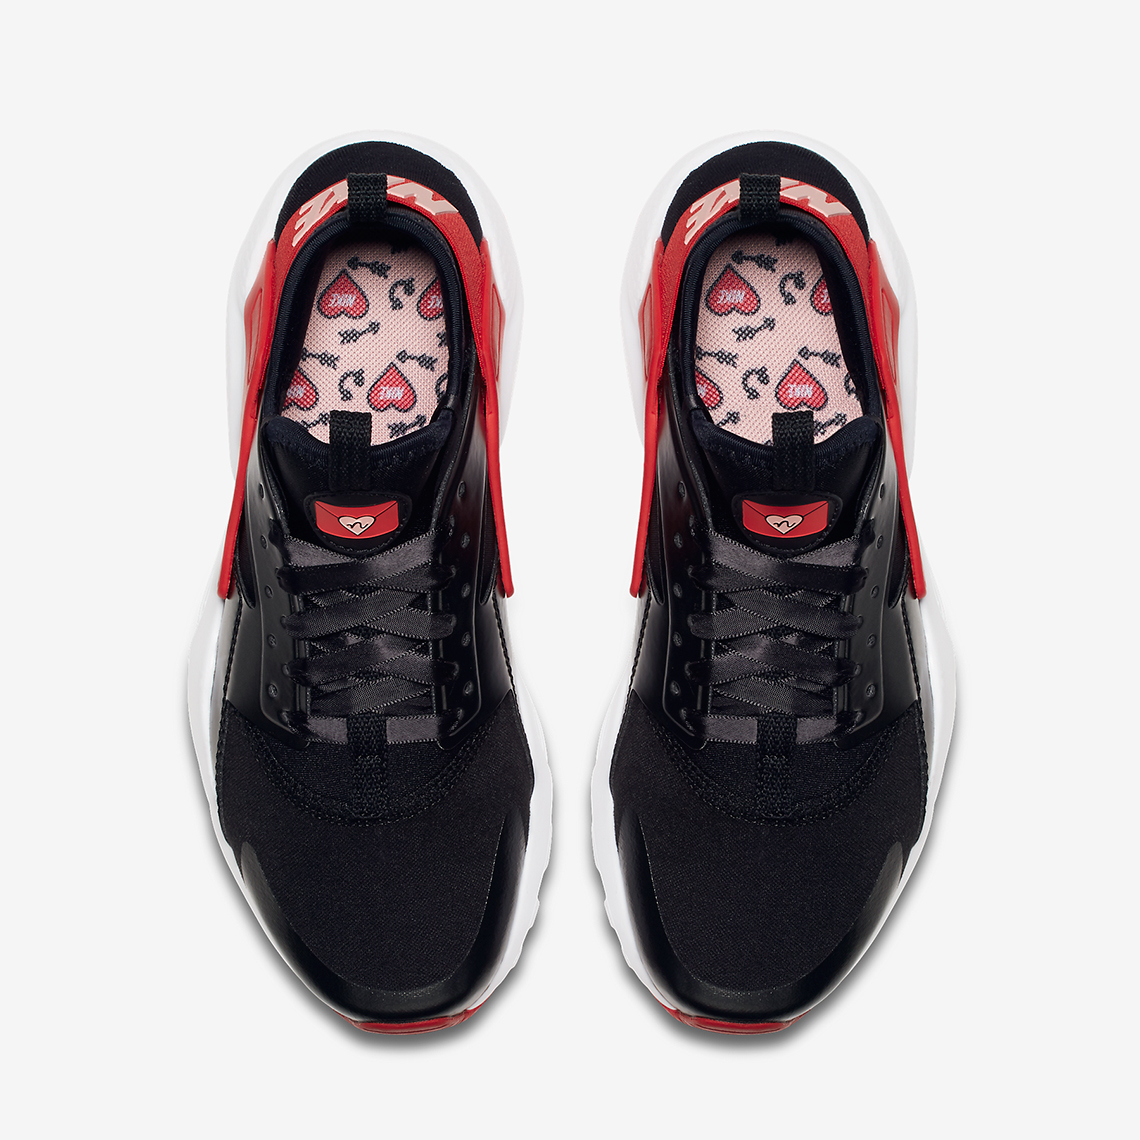 Nike Air Huarache Run Ultra Kids Valentines Day Ao1030 001 Available Now 6